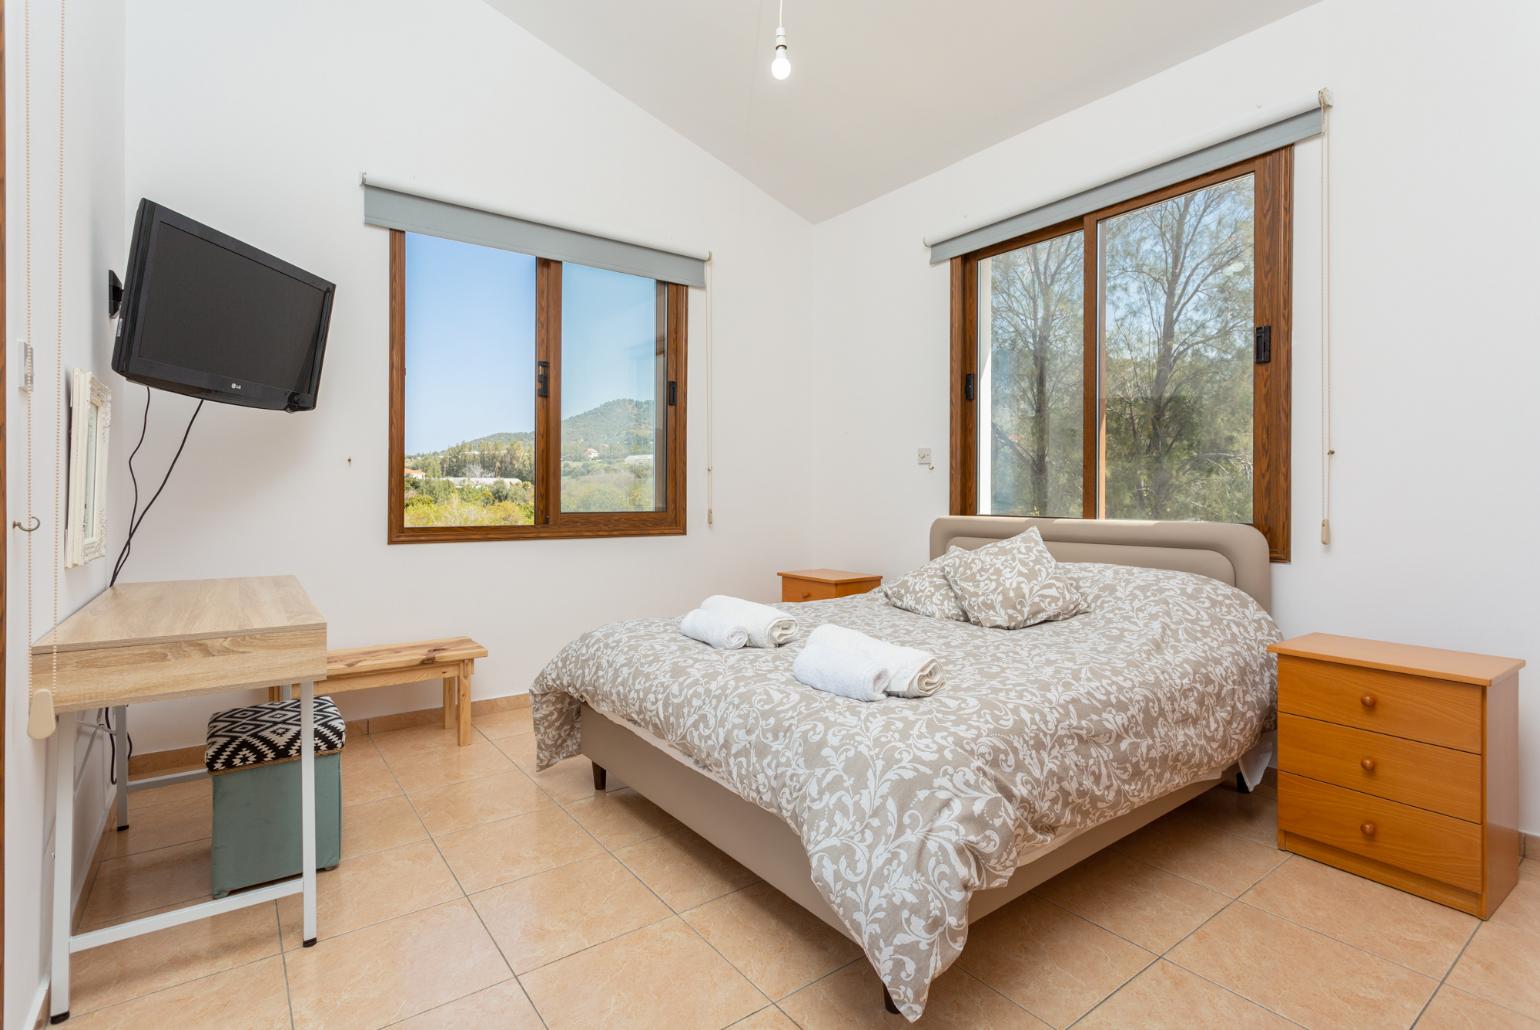 Double bedroom with en suite bathroom, A/C, TV, and upper terrace access with sea views